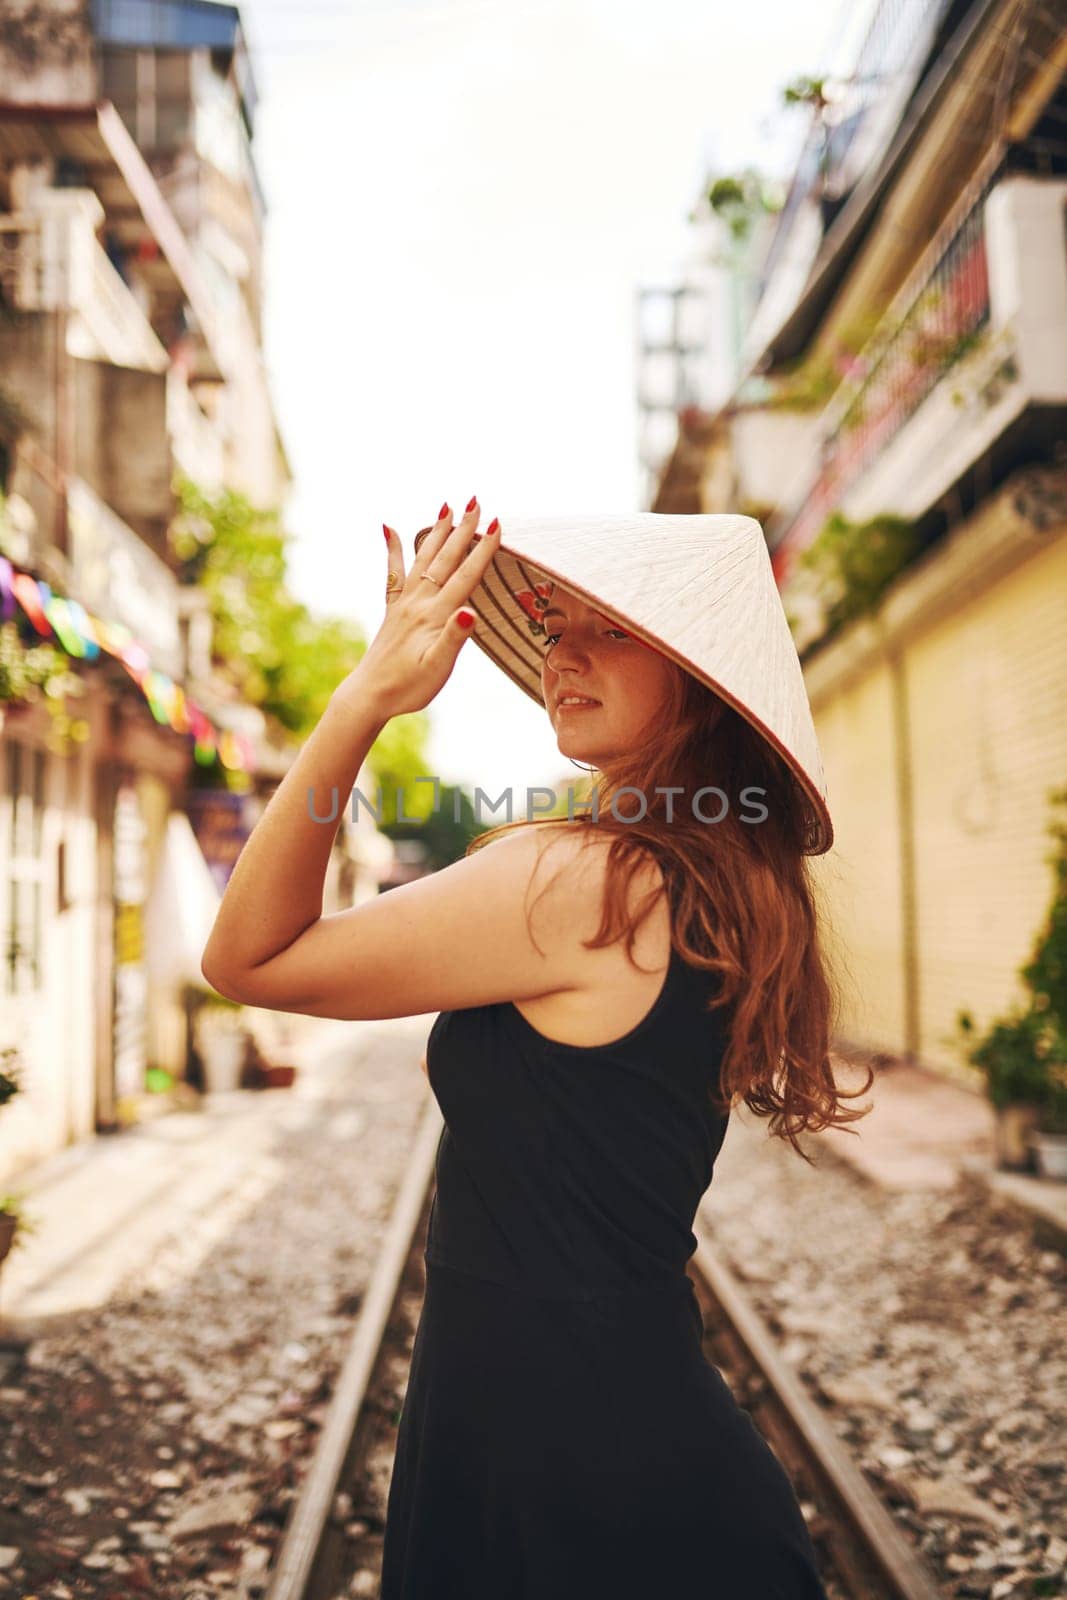 I use travel as an escape from daily life. a young woman wearing a conical hat while exploring a foreign city. by YuriArcurs